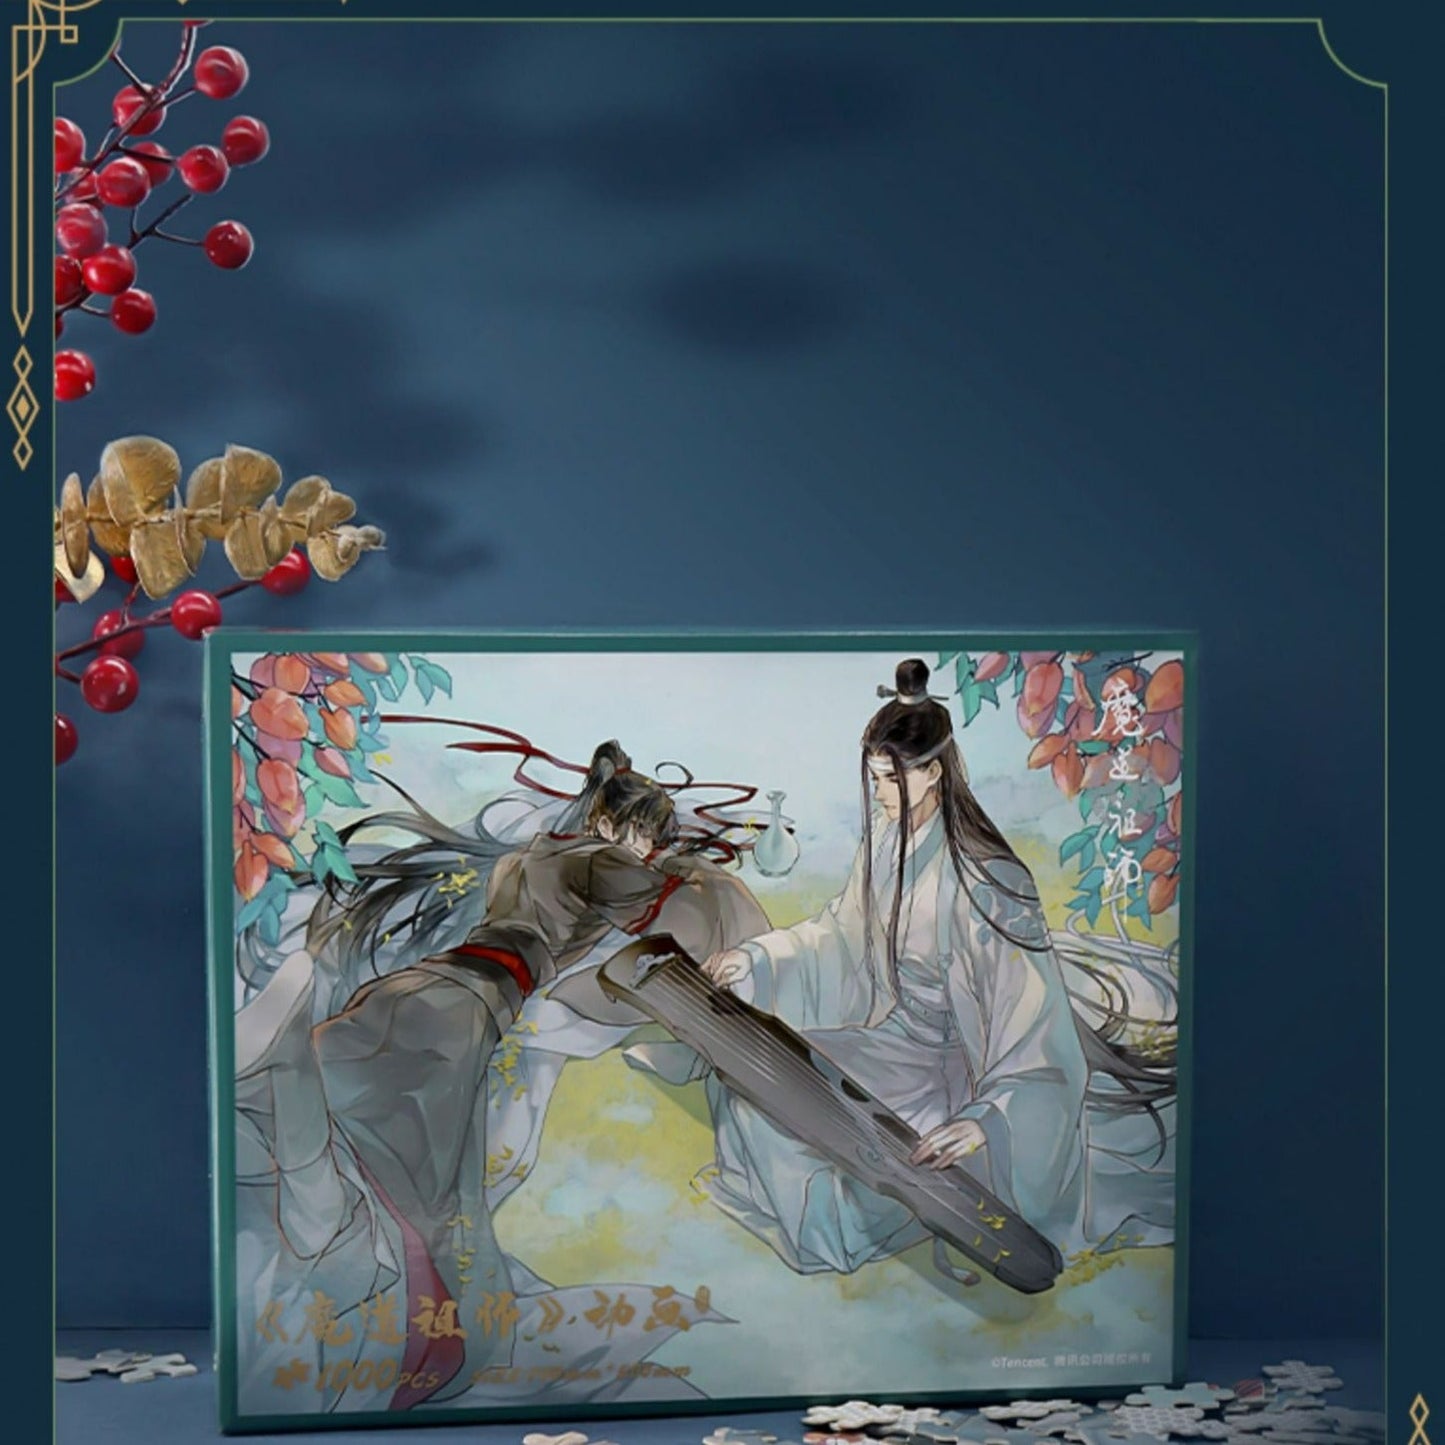 MDZS 24 Solar Terms Puzzle Posters 16818:400999